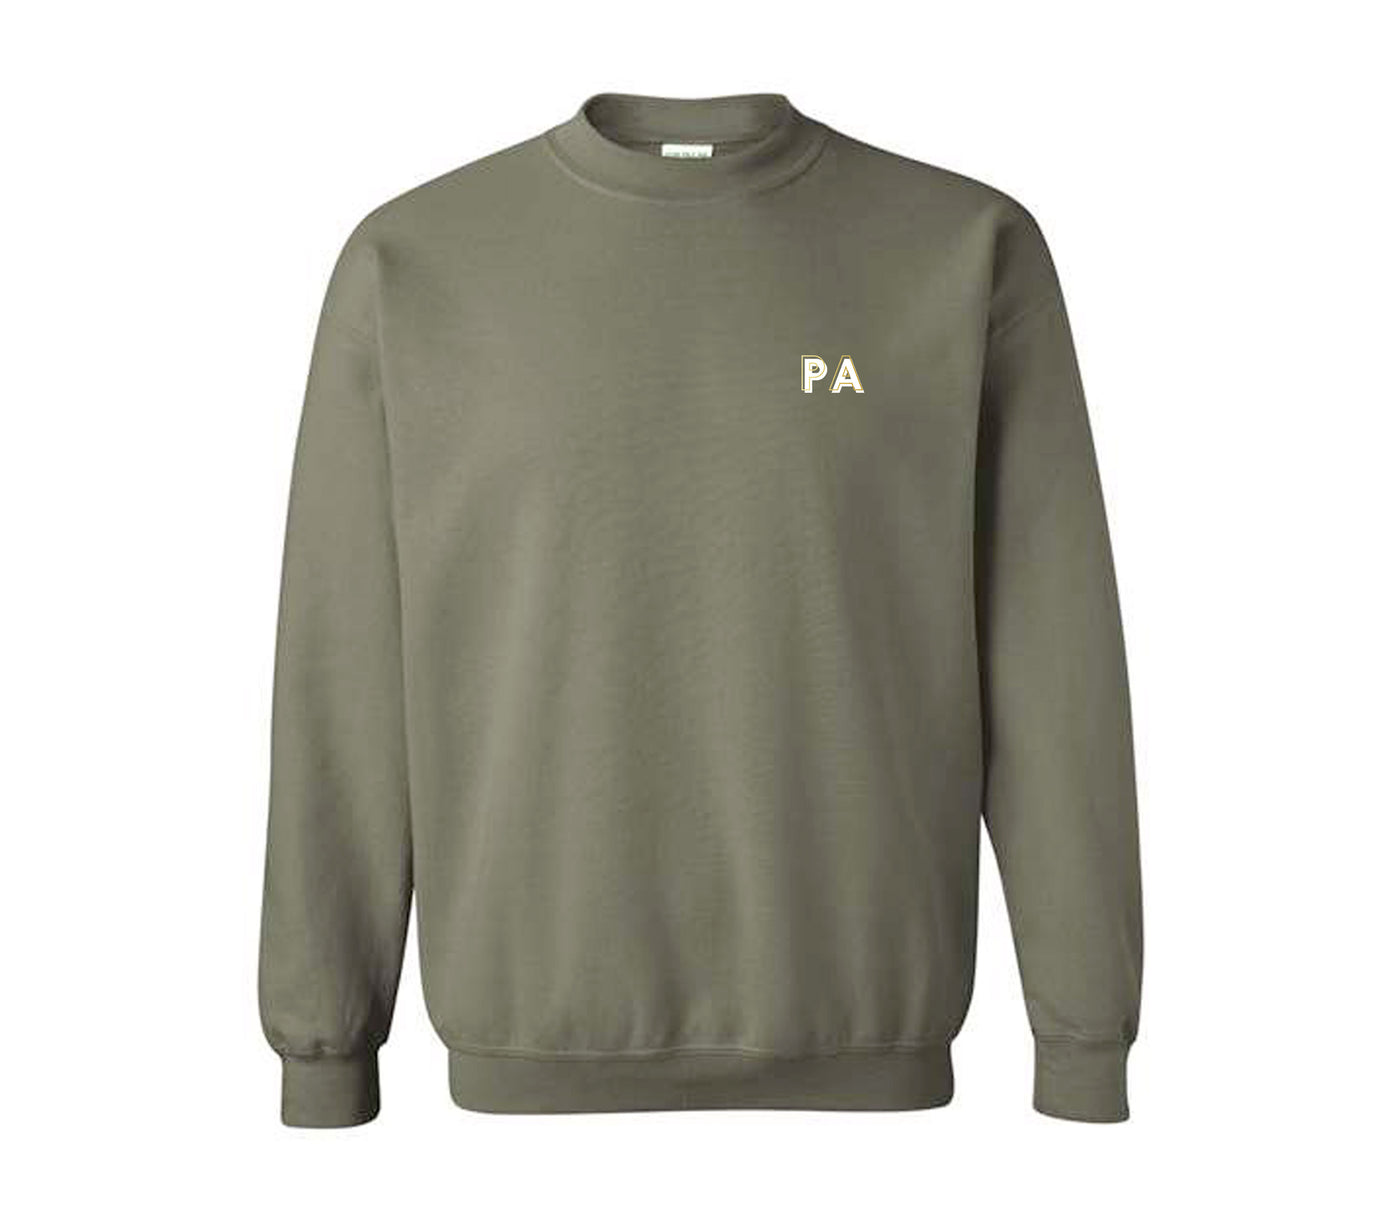 PA Creds - Non-Pocketed Crew Sweatshirt